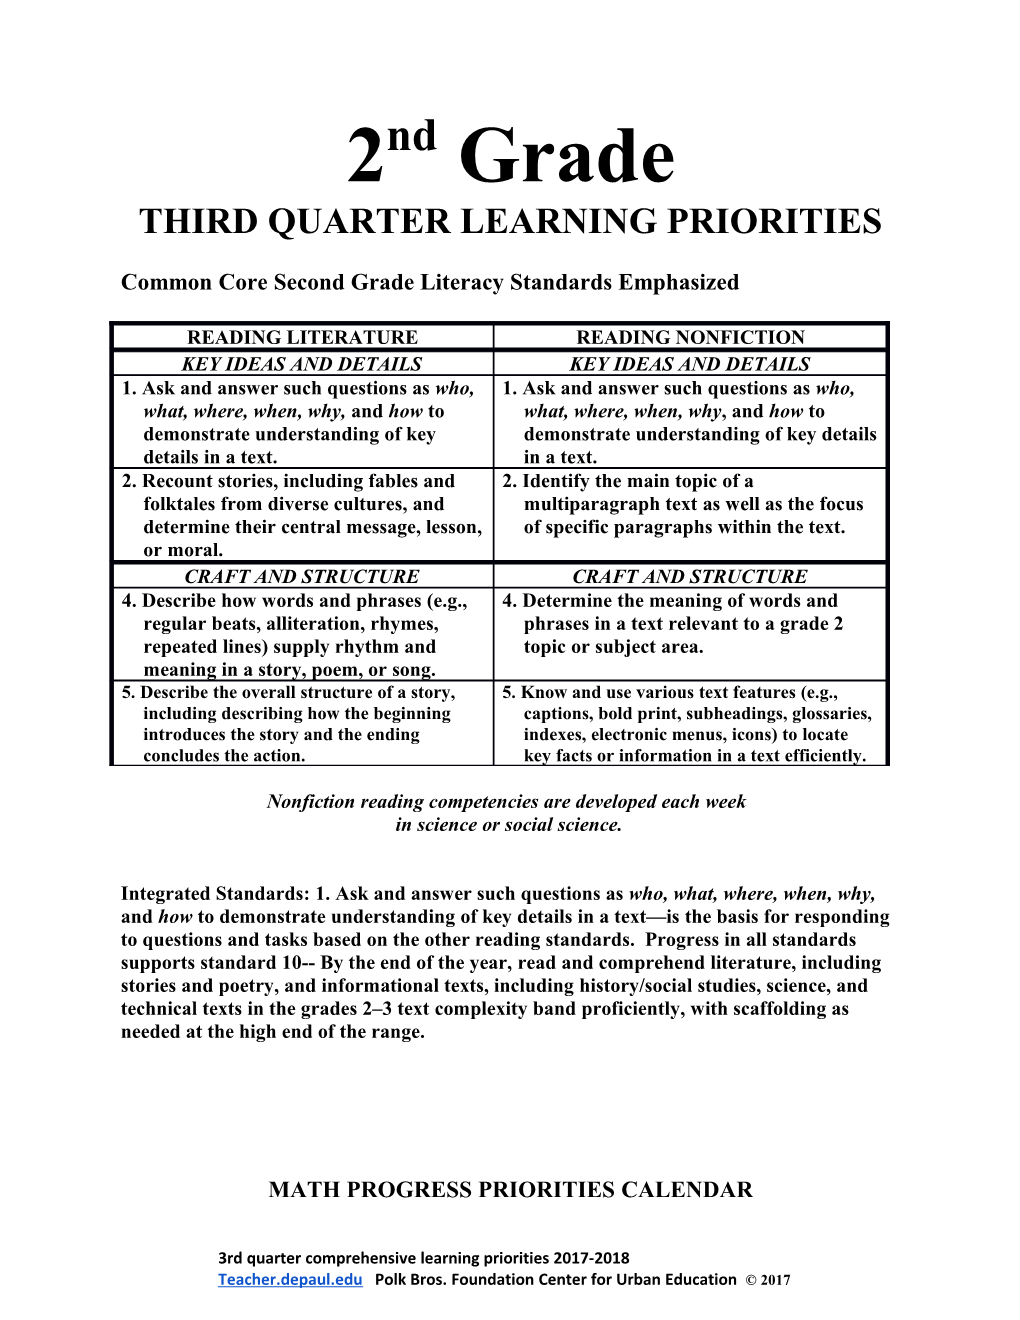 Common Core Second Grade Literacy Standards Emphasized